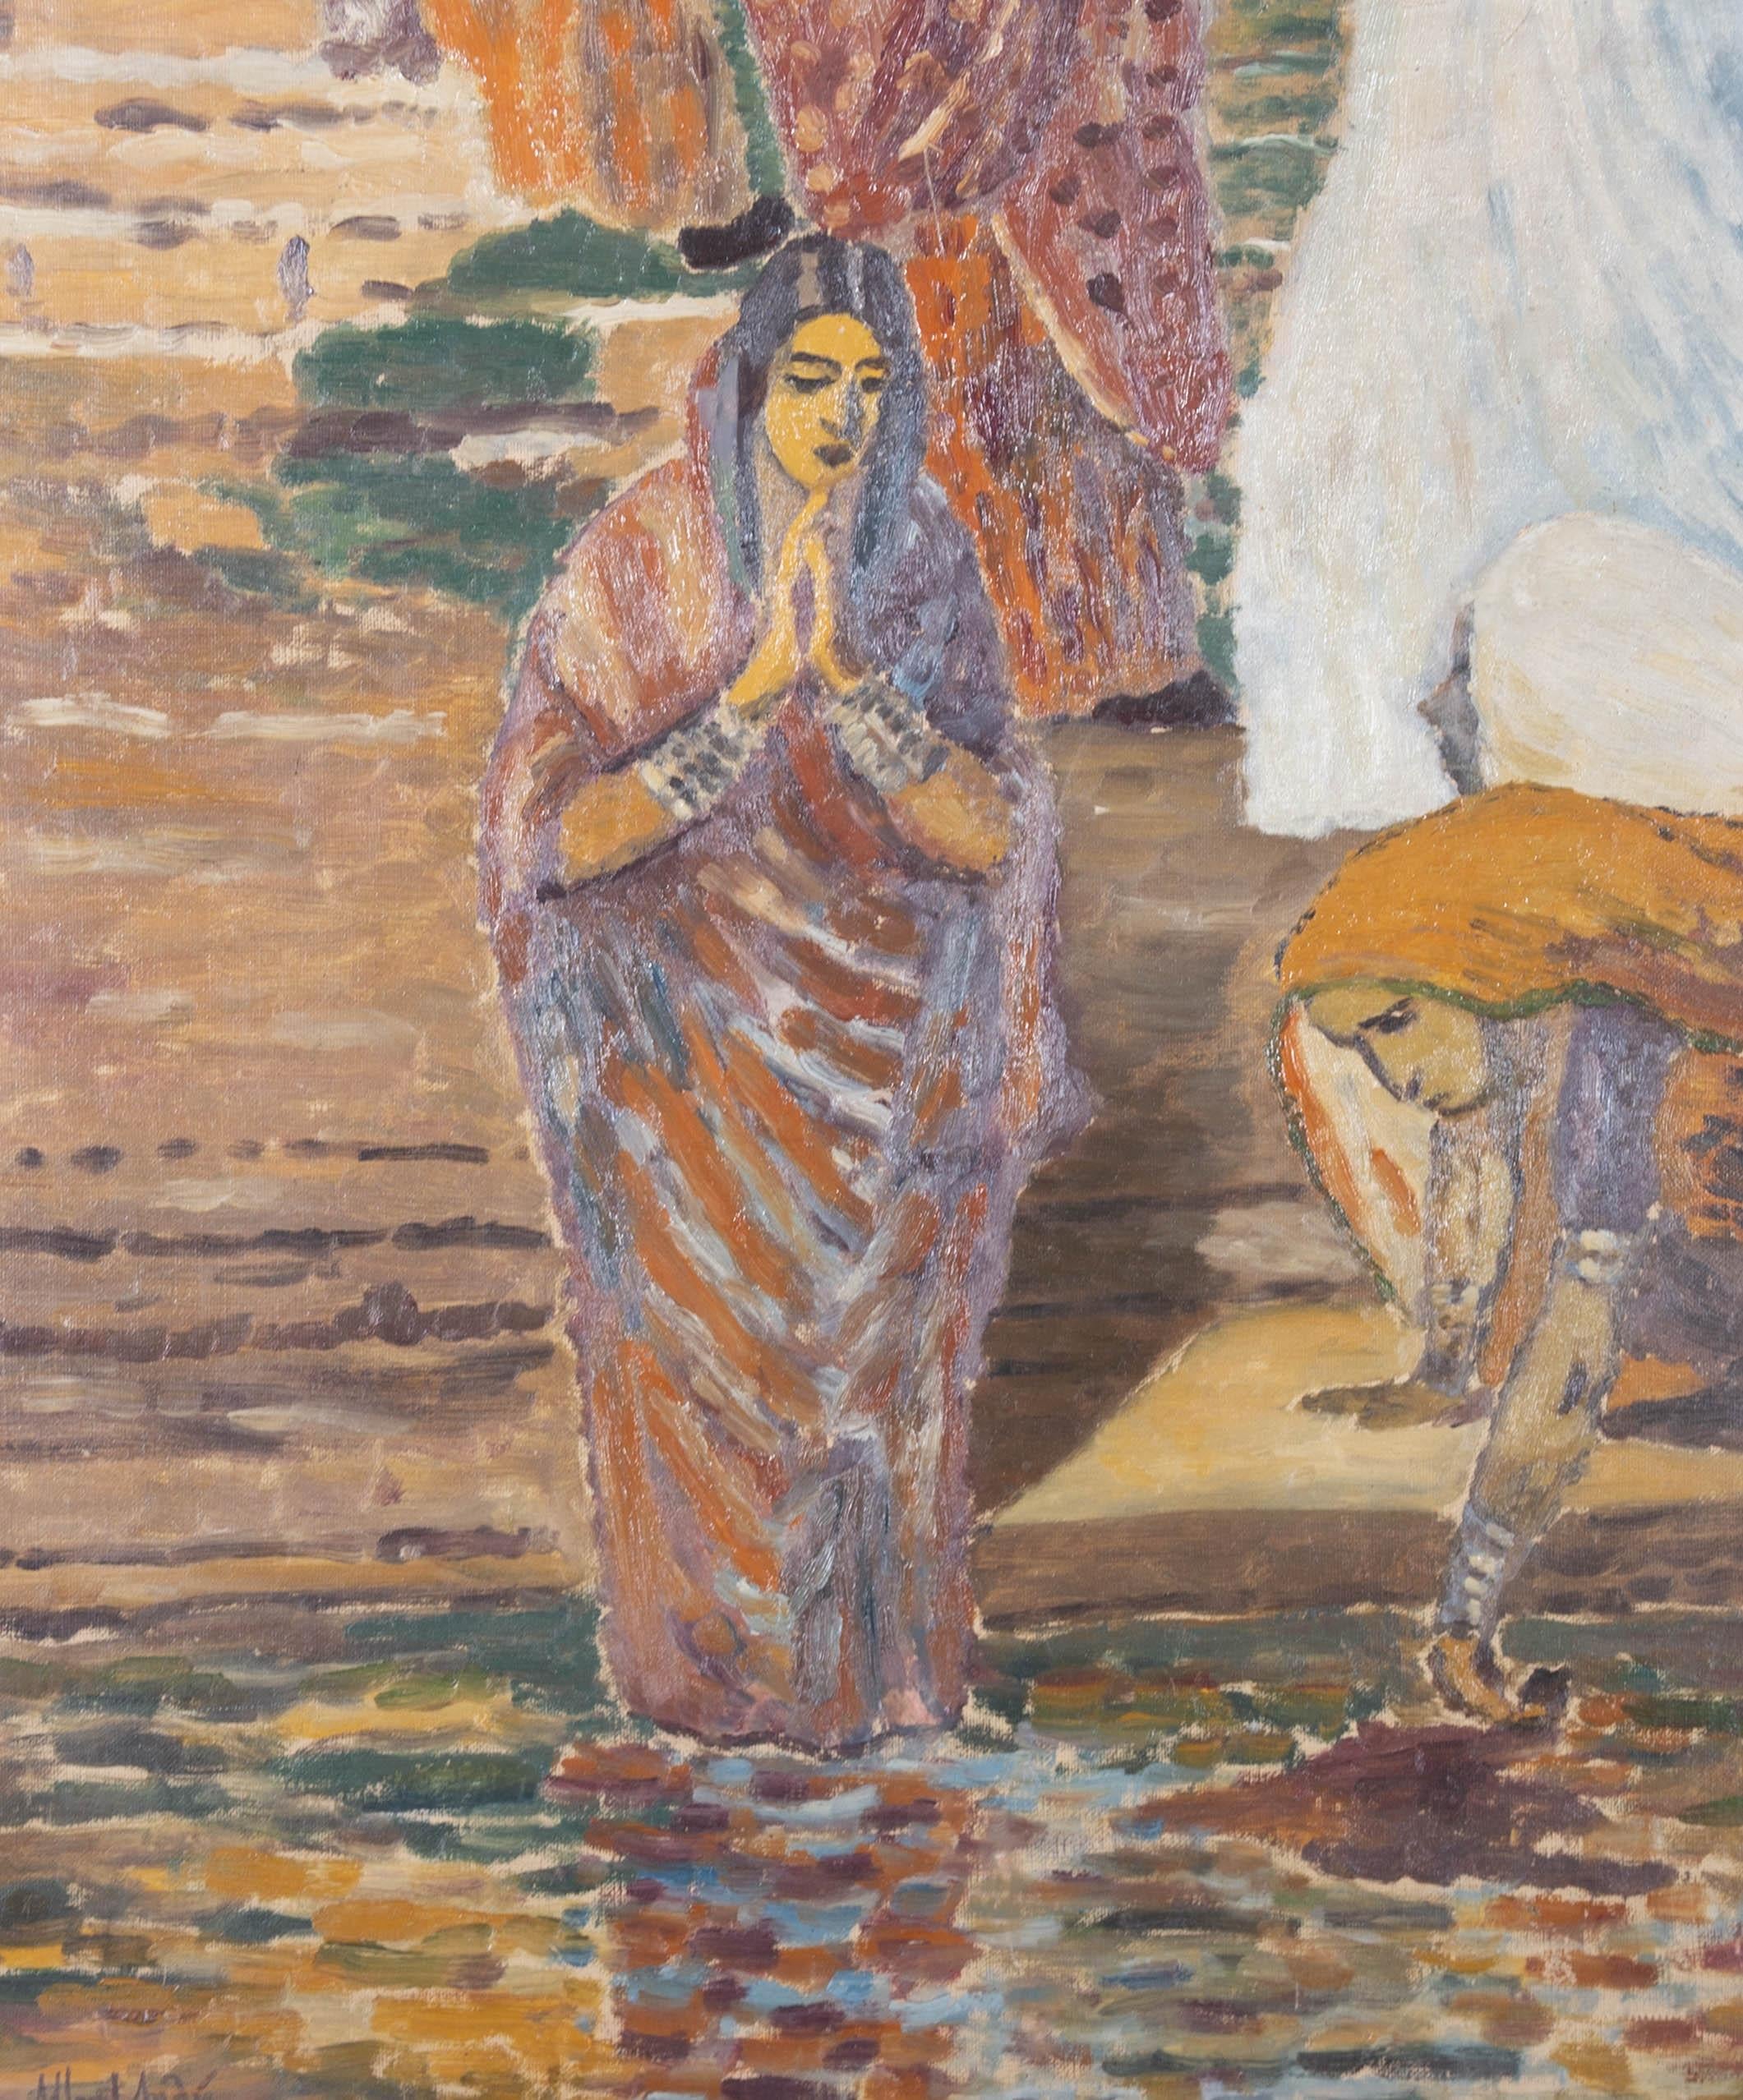 A masterful French Impressionist oil showing a beautiful woman in a sari and metal bracelets, standing and praying at the steps of the Ganges. Another woman can be seen washing cloth in the waters to her right. The artist's use of earthy tones adds